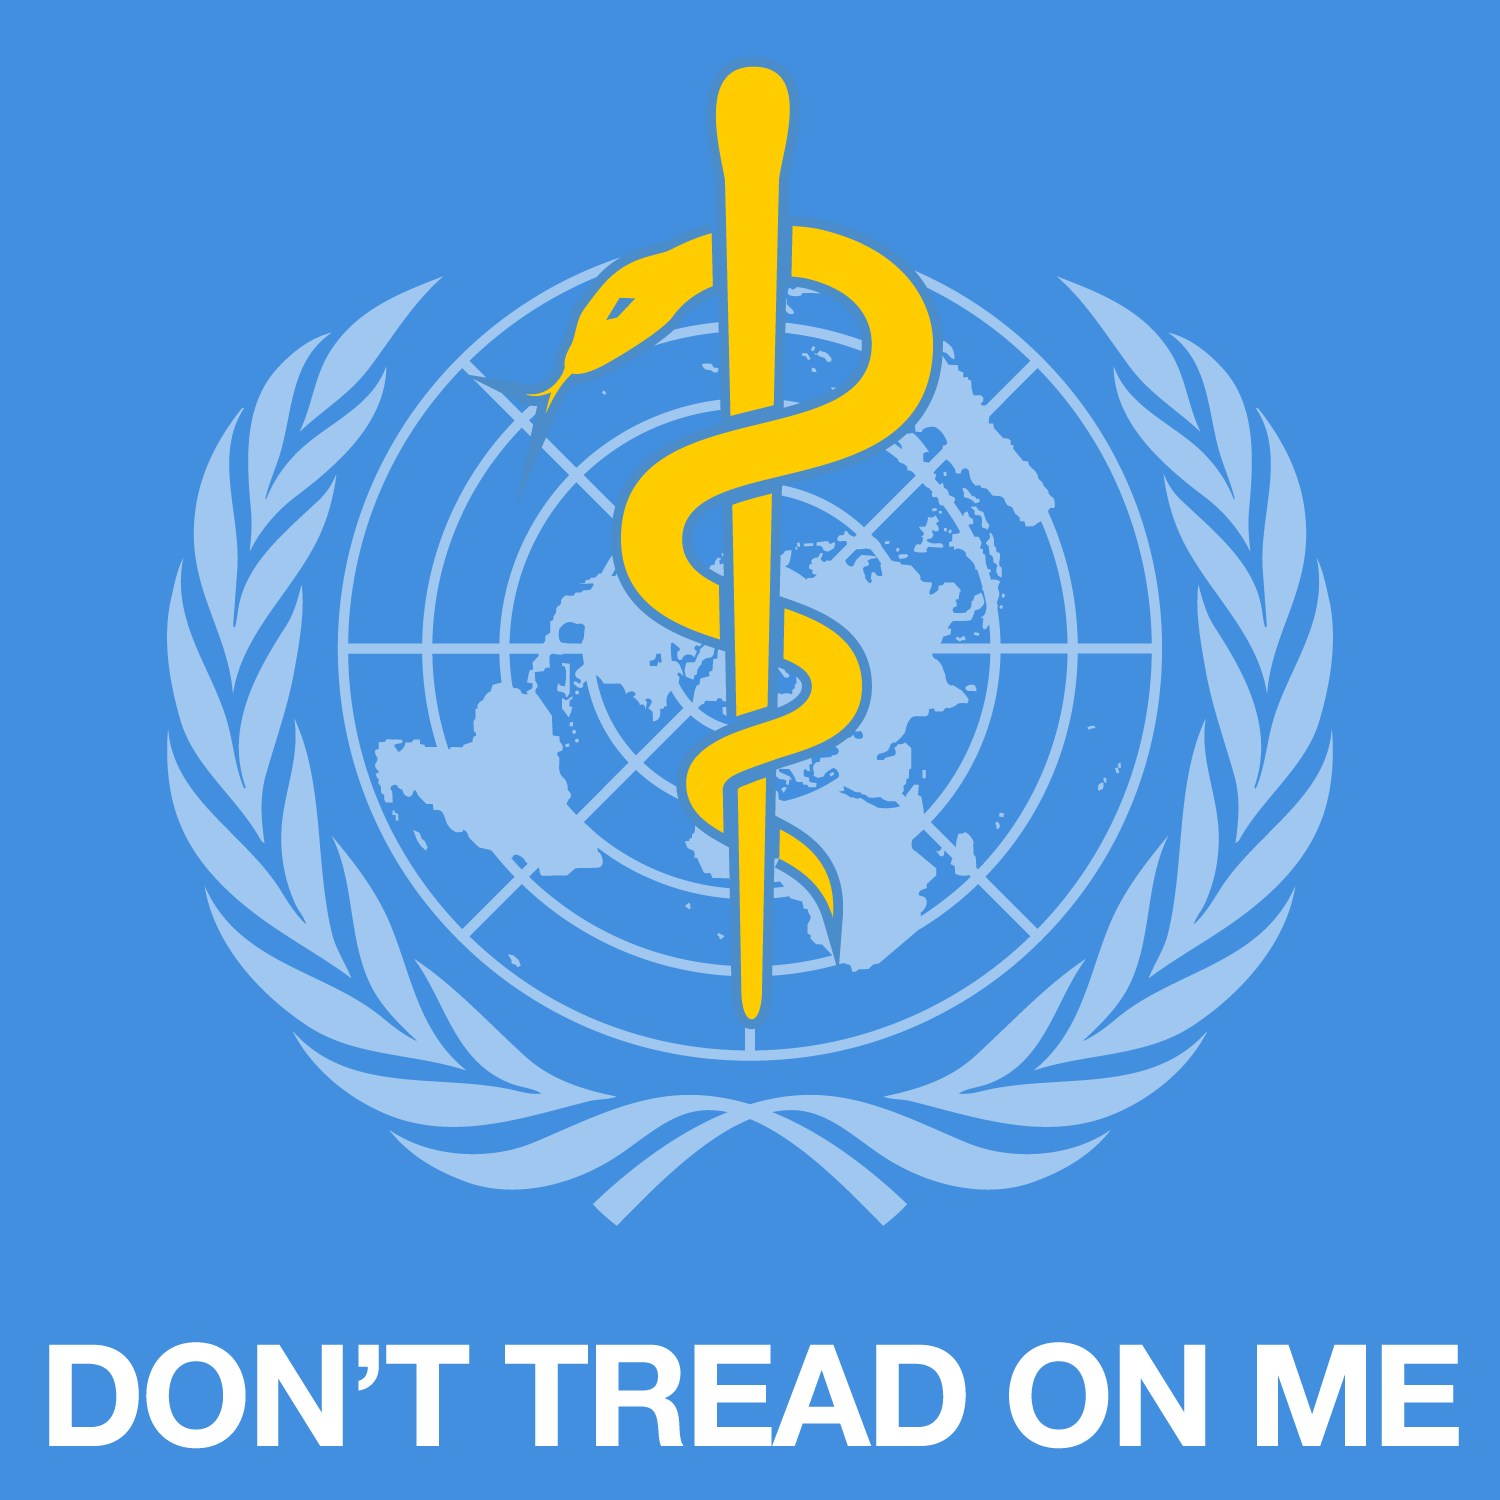 We Must Defend Our WHO